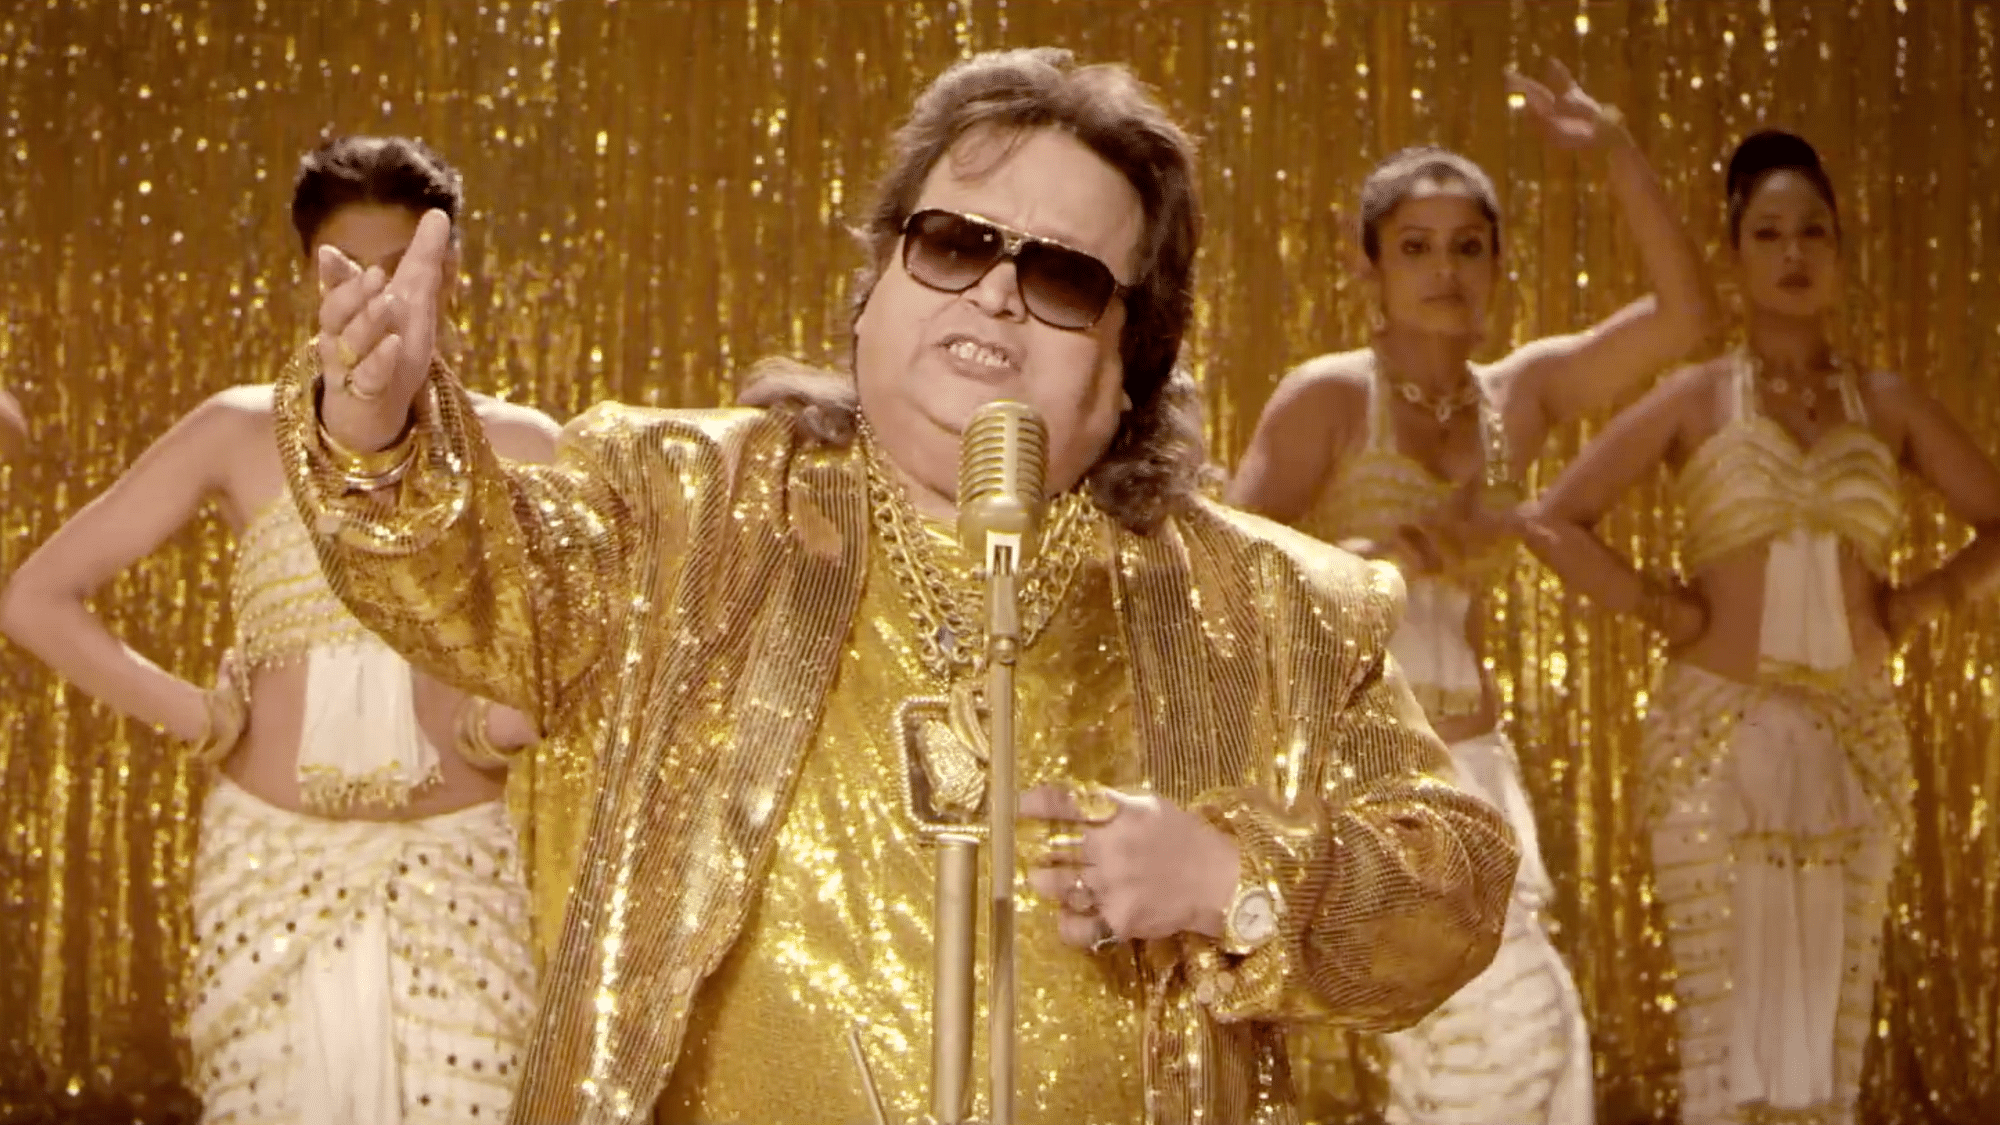 <div class="paragraphs"><p>Bappi Lahiri&nbsp;<a href="https://www.thequint.com/entertainment/singer-composer-bappi-lahiri-passes-away-in-mumbai-hospital#read-more">passed away late on Tuesday evening</a> in a hospital in Mumbai following multiple health issues.</p></div>